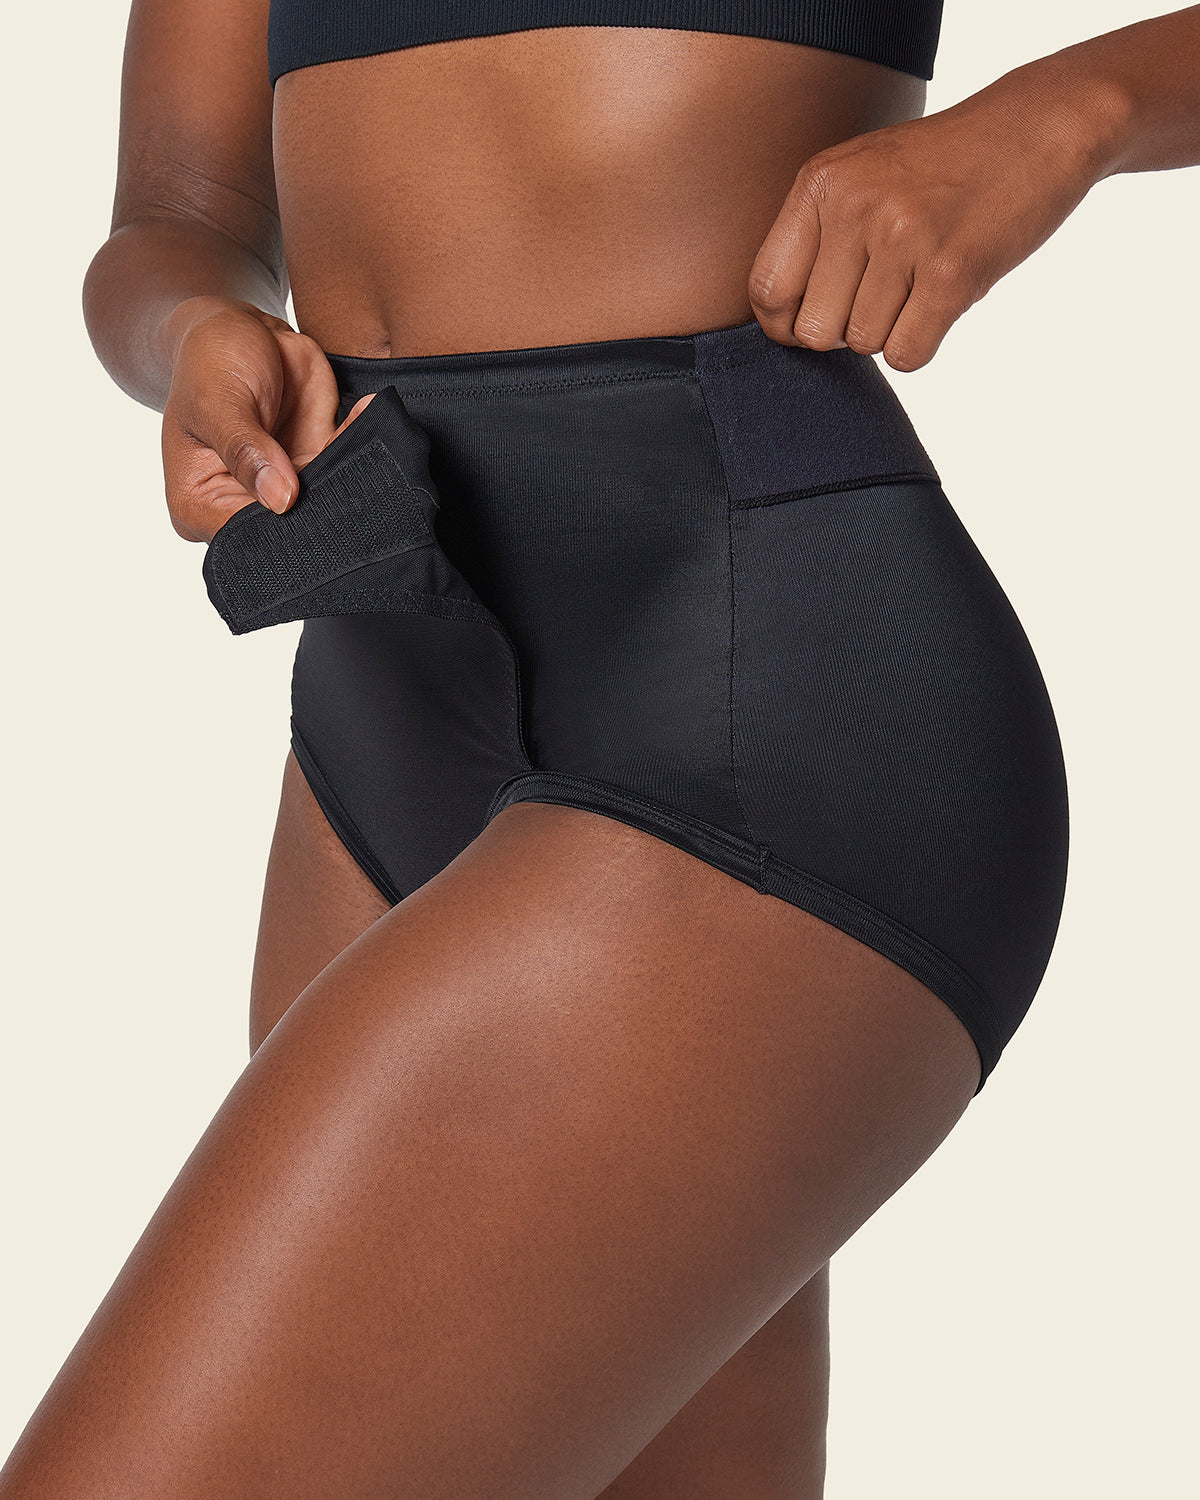 Shapewear & Fajas The Best Faja Fresh and Light Body Shaper Brief Waisted  Short Maternity Support Panty Abdominal Double Layer Support the Belly Full  rear coverage Semaless Lower Back Support Fajas C 